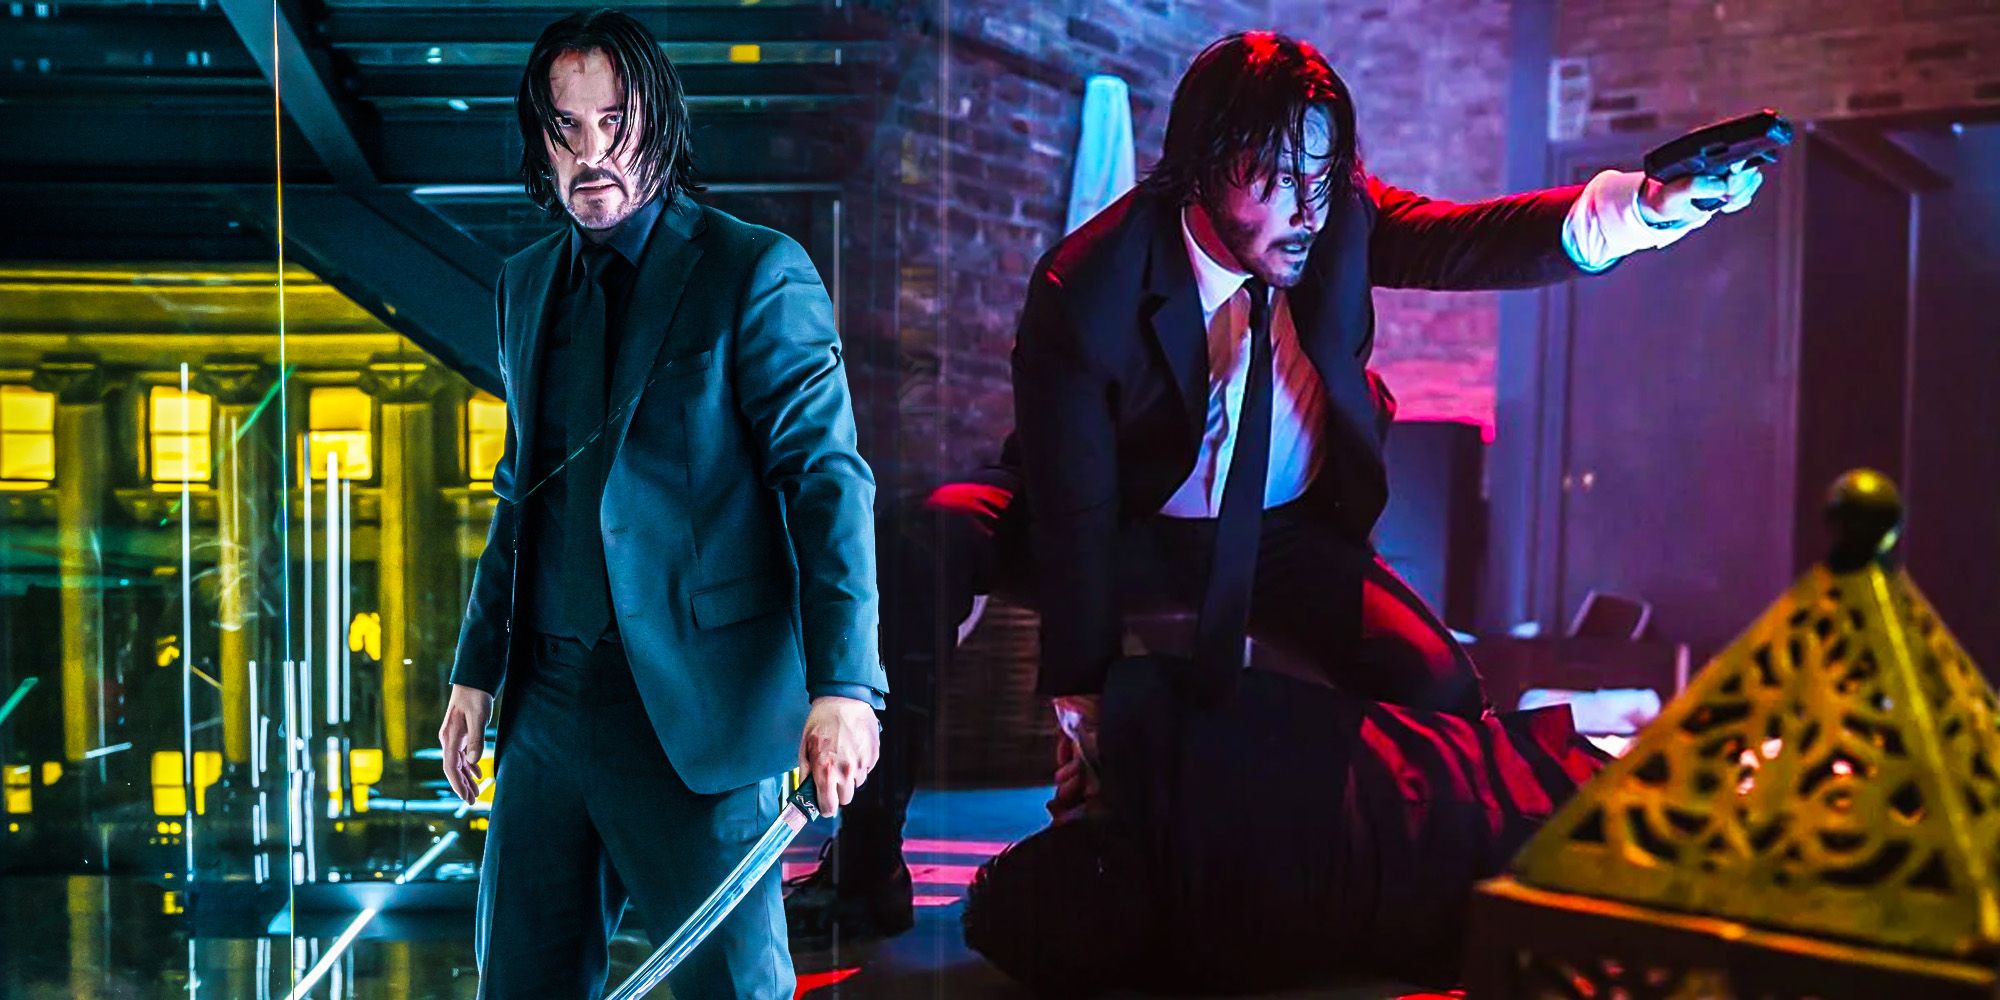 John Wick completely raised the bar for martial arts movies